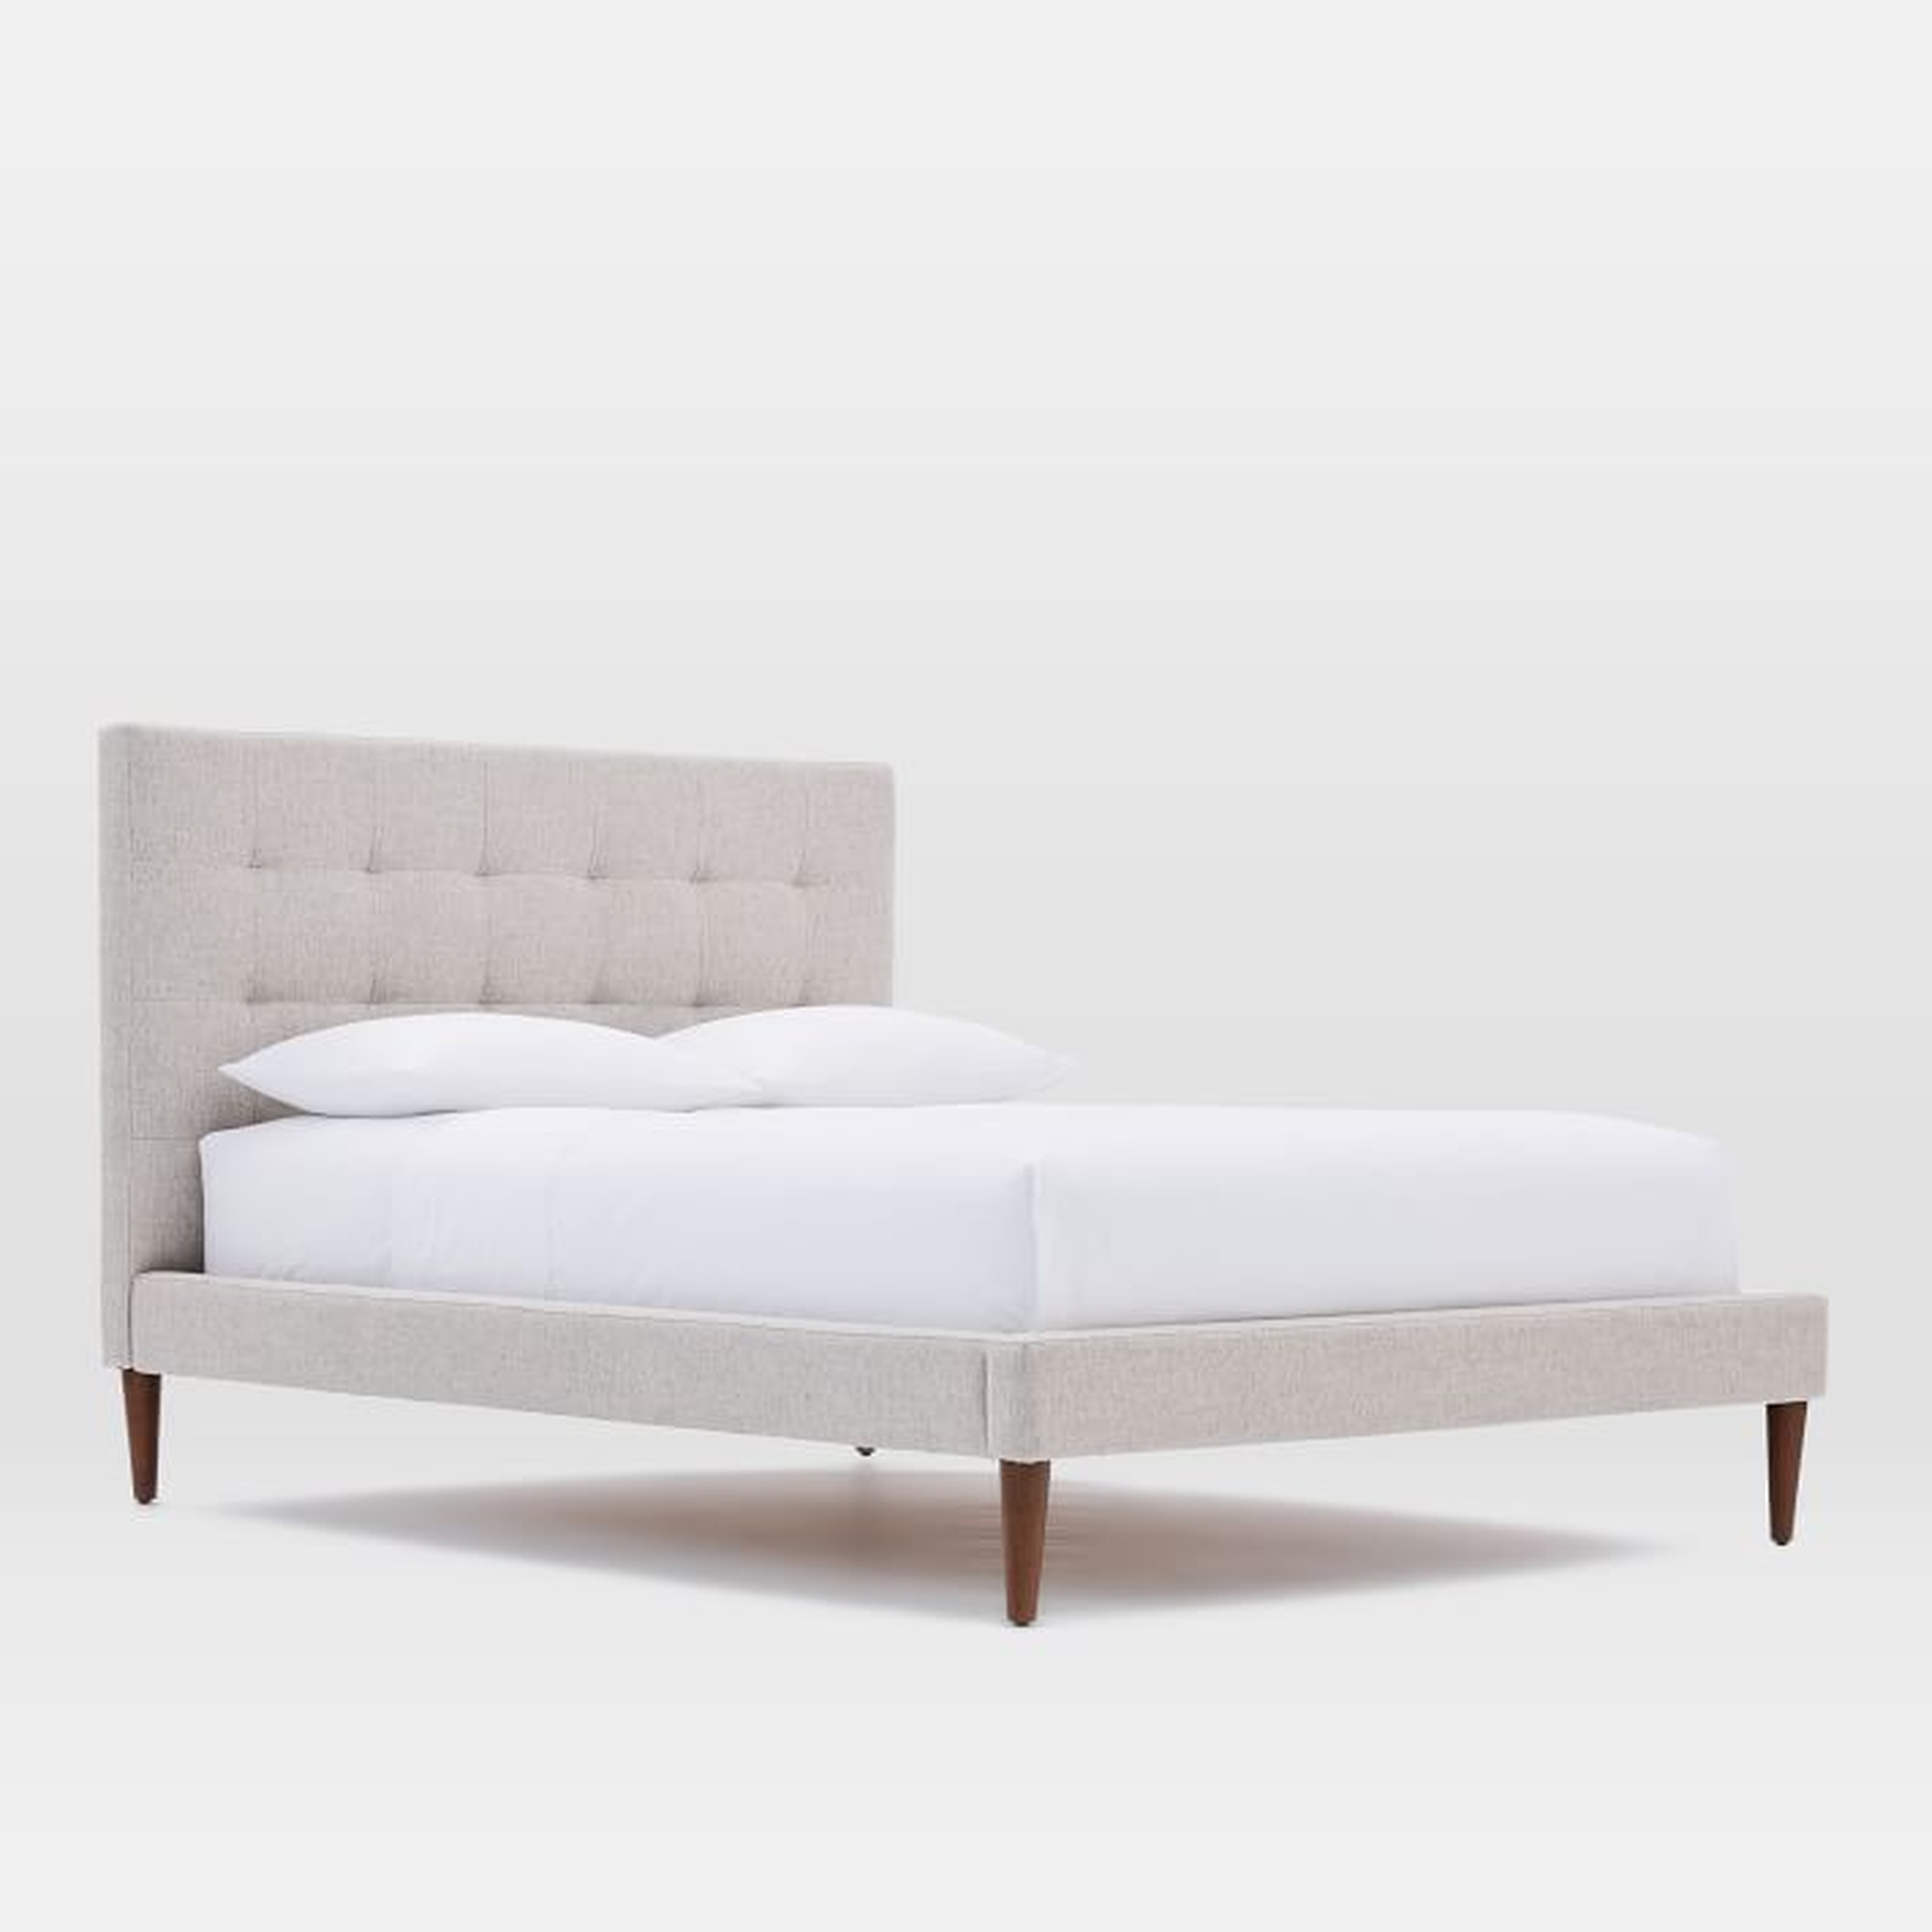 Grid-Tufted Upholstered Tapered Leg Bed, Queen, Stone Twill, Standard Headboard - West Elm